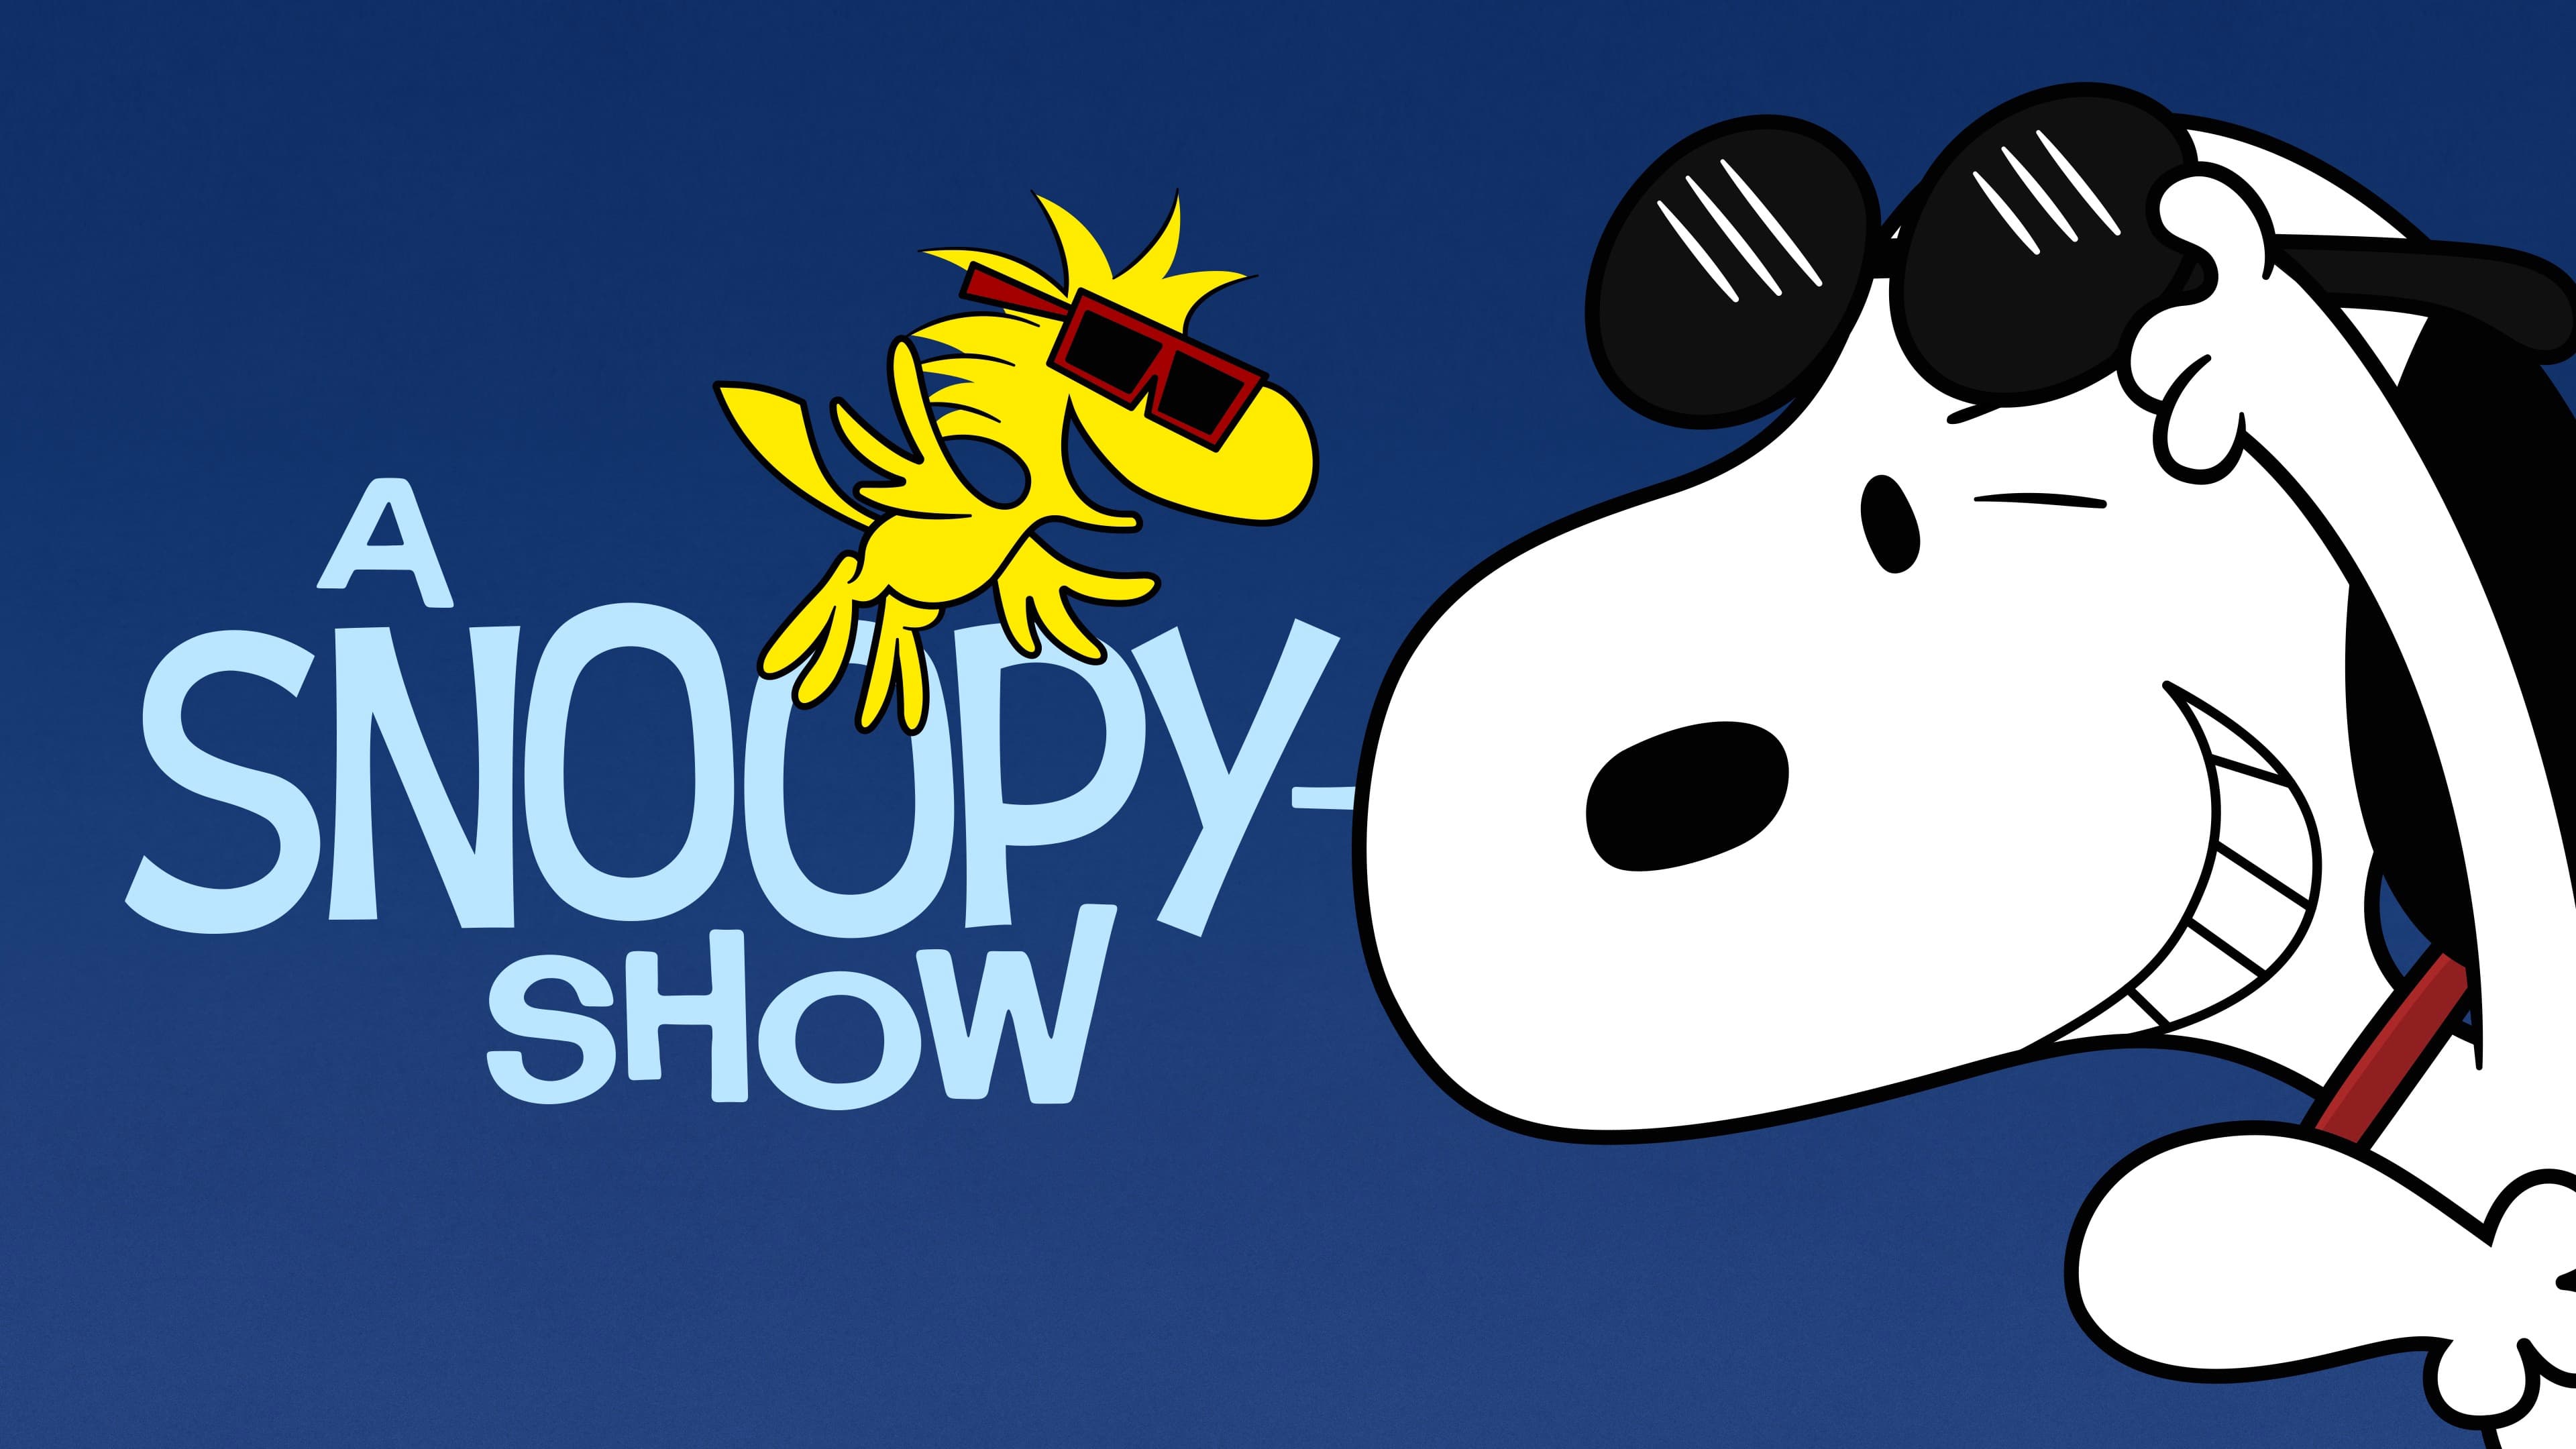 The Snoopy Show Gallery Image